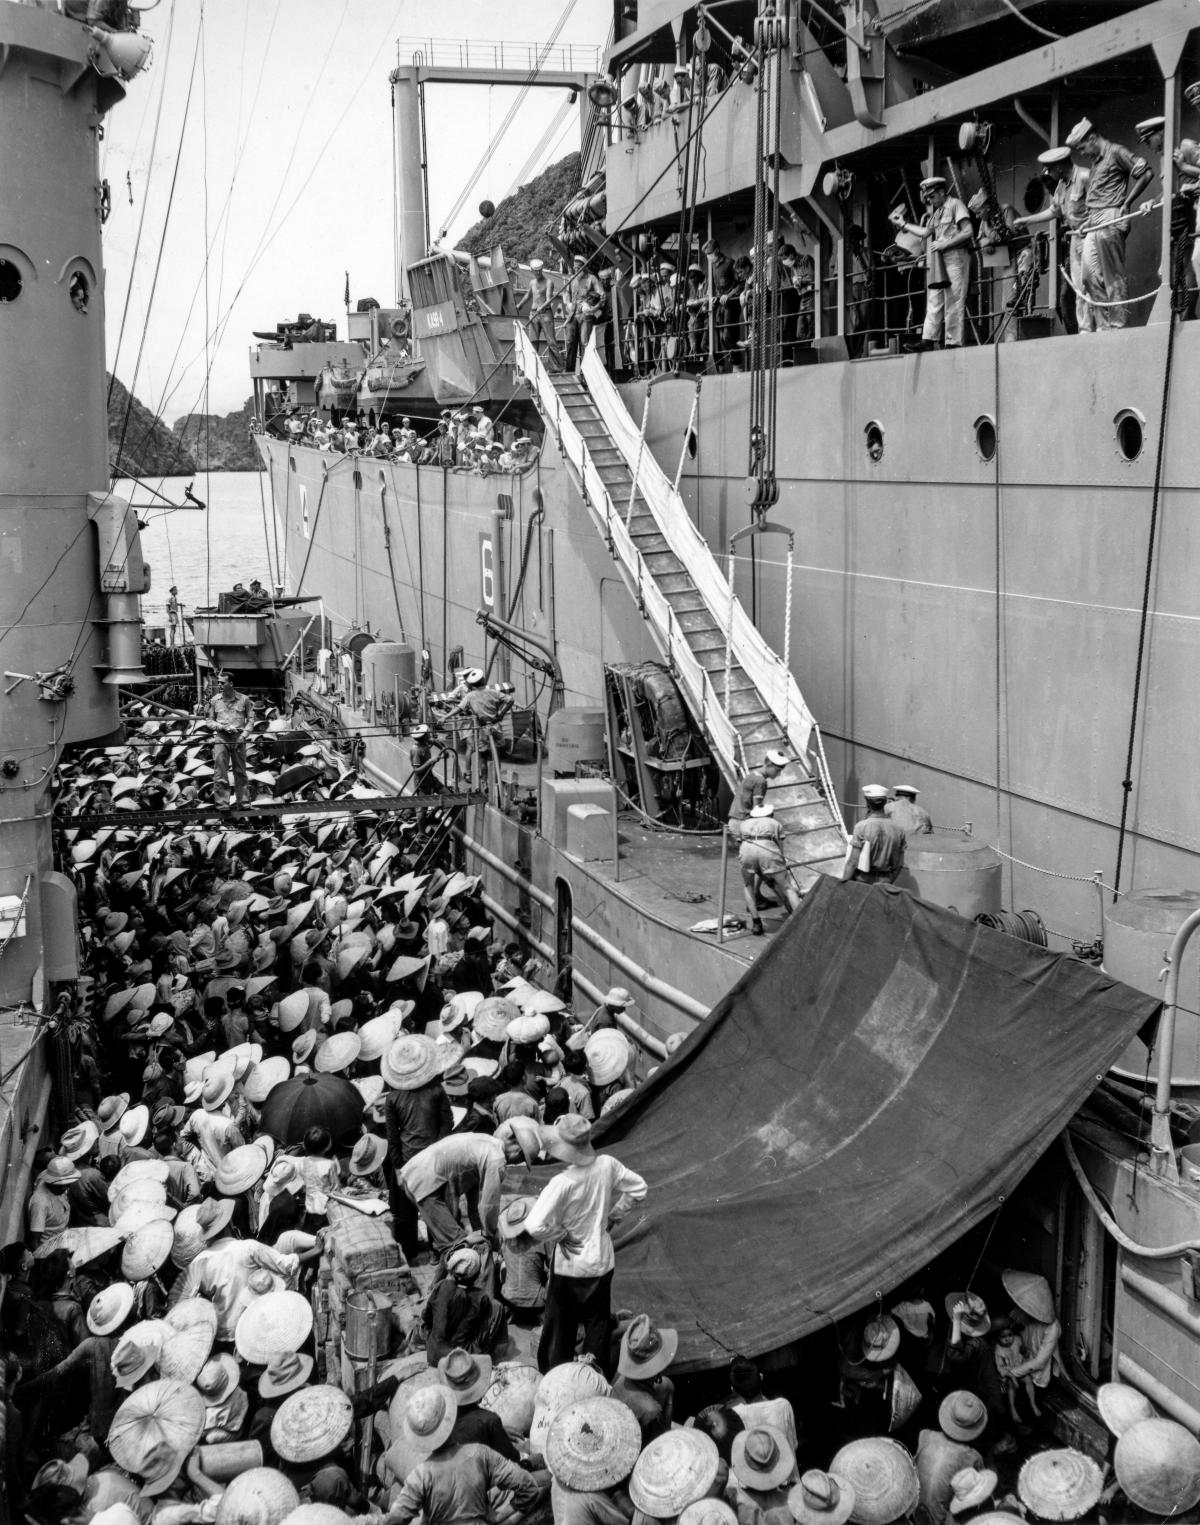 Voting with their Feet: Vietnamese refugees are transferred from a French ship to the USS Montague (AKA-98) during Operation Passage to Freedom.